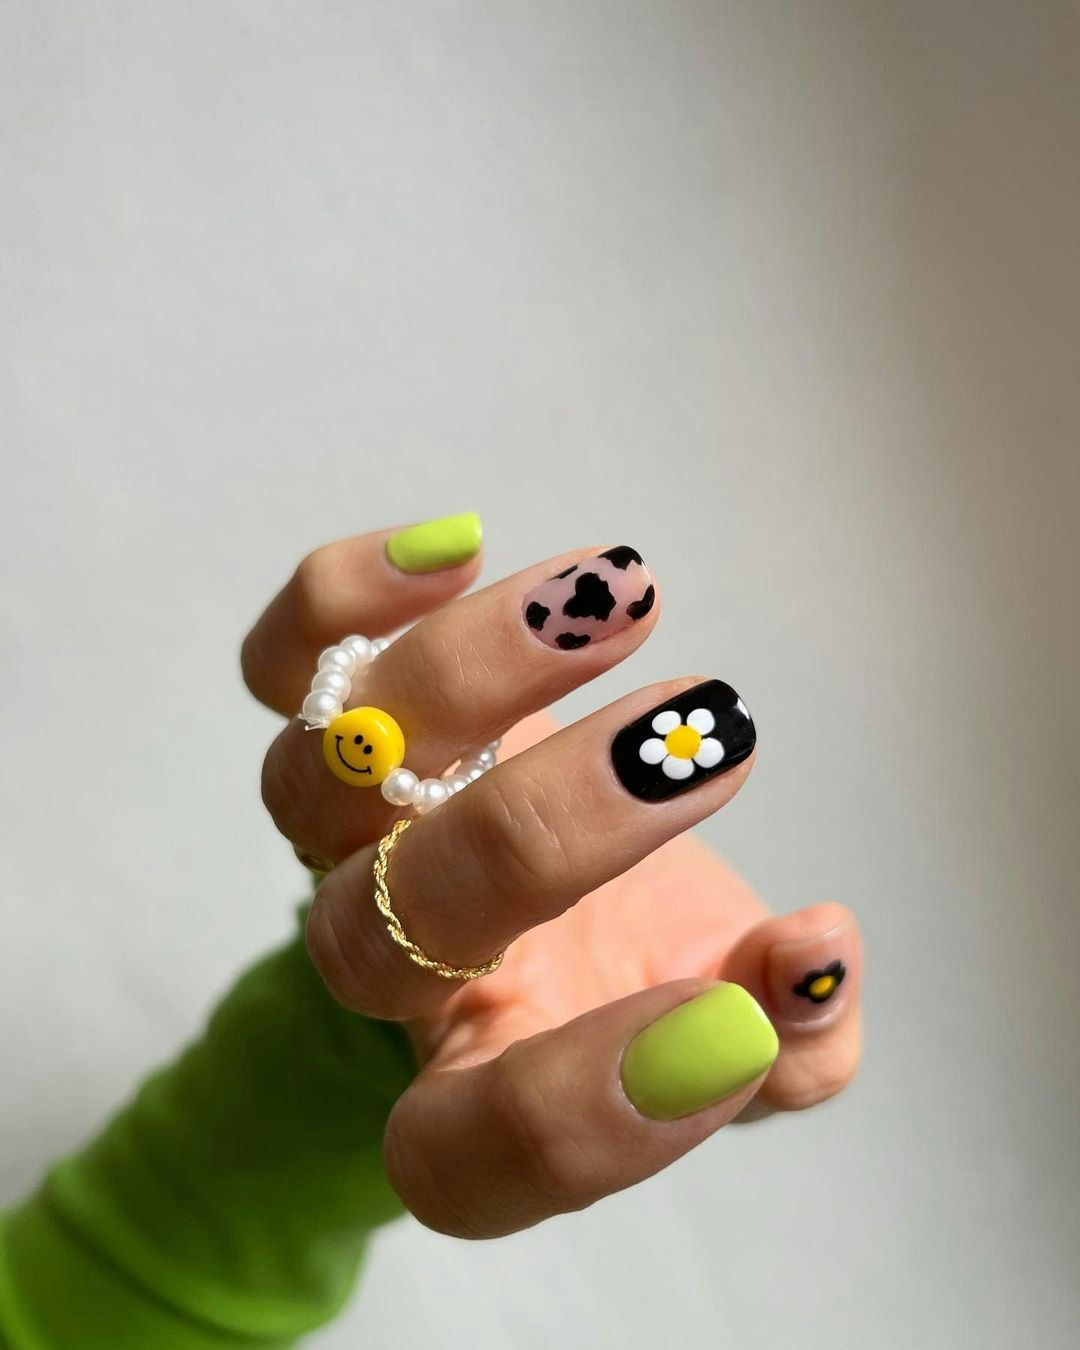 13 glamorous nail art ideas for your next manicure